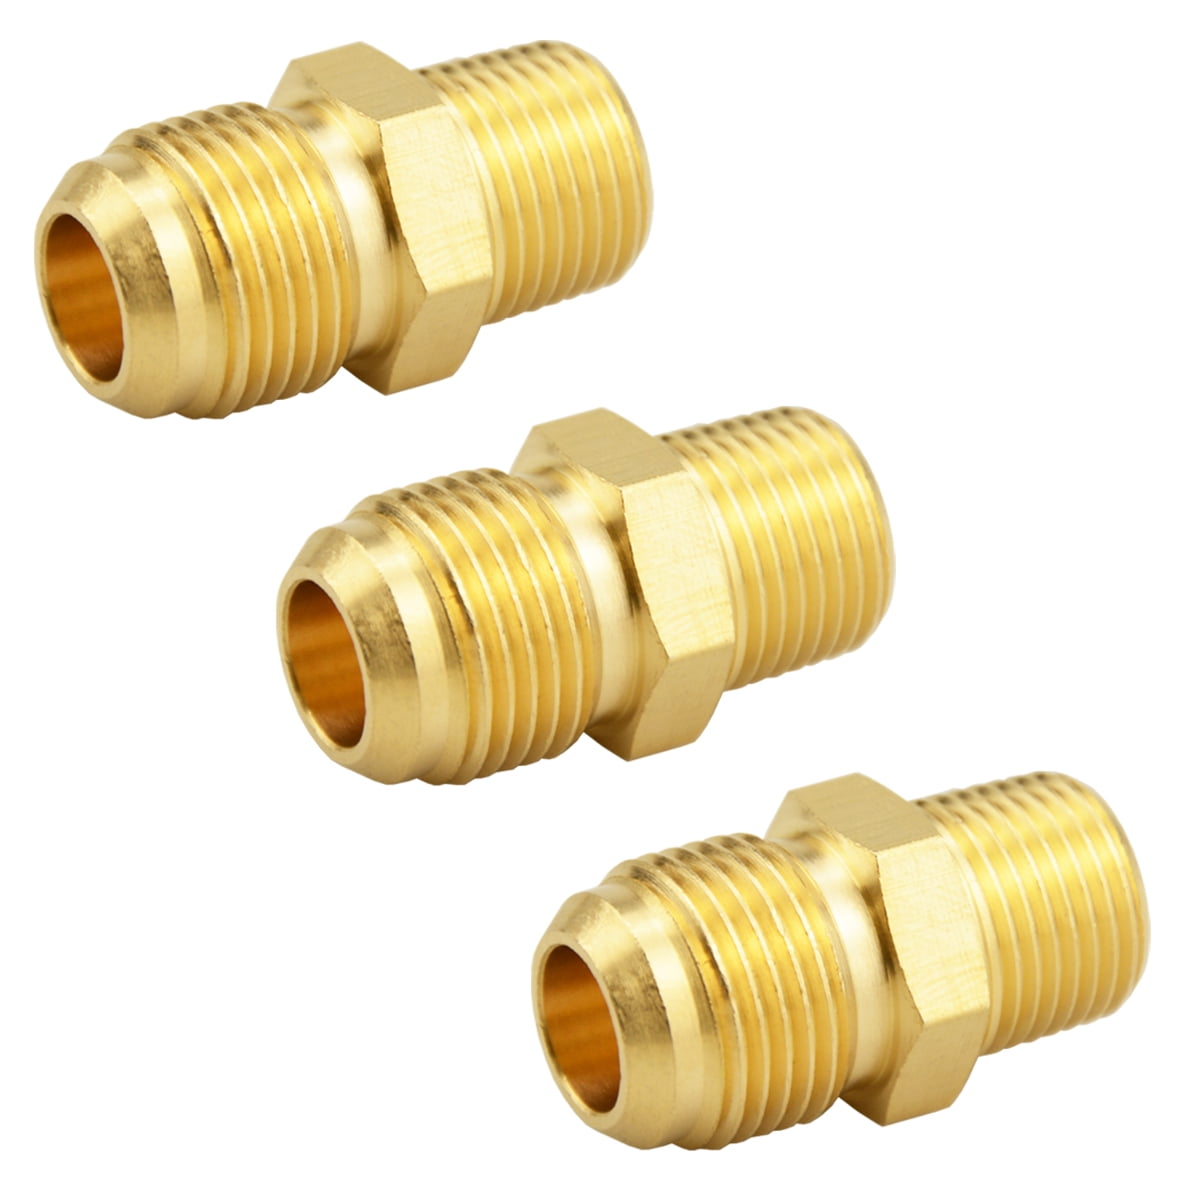 5 PACK BRASS HEX COUPLING 1/2" COUPLER UNION FITTING ADAPTER AIR FUEL WATER 